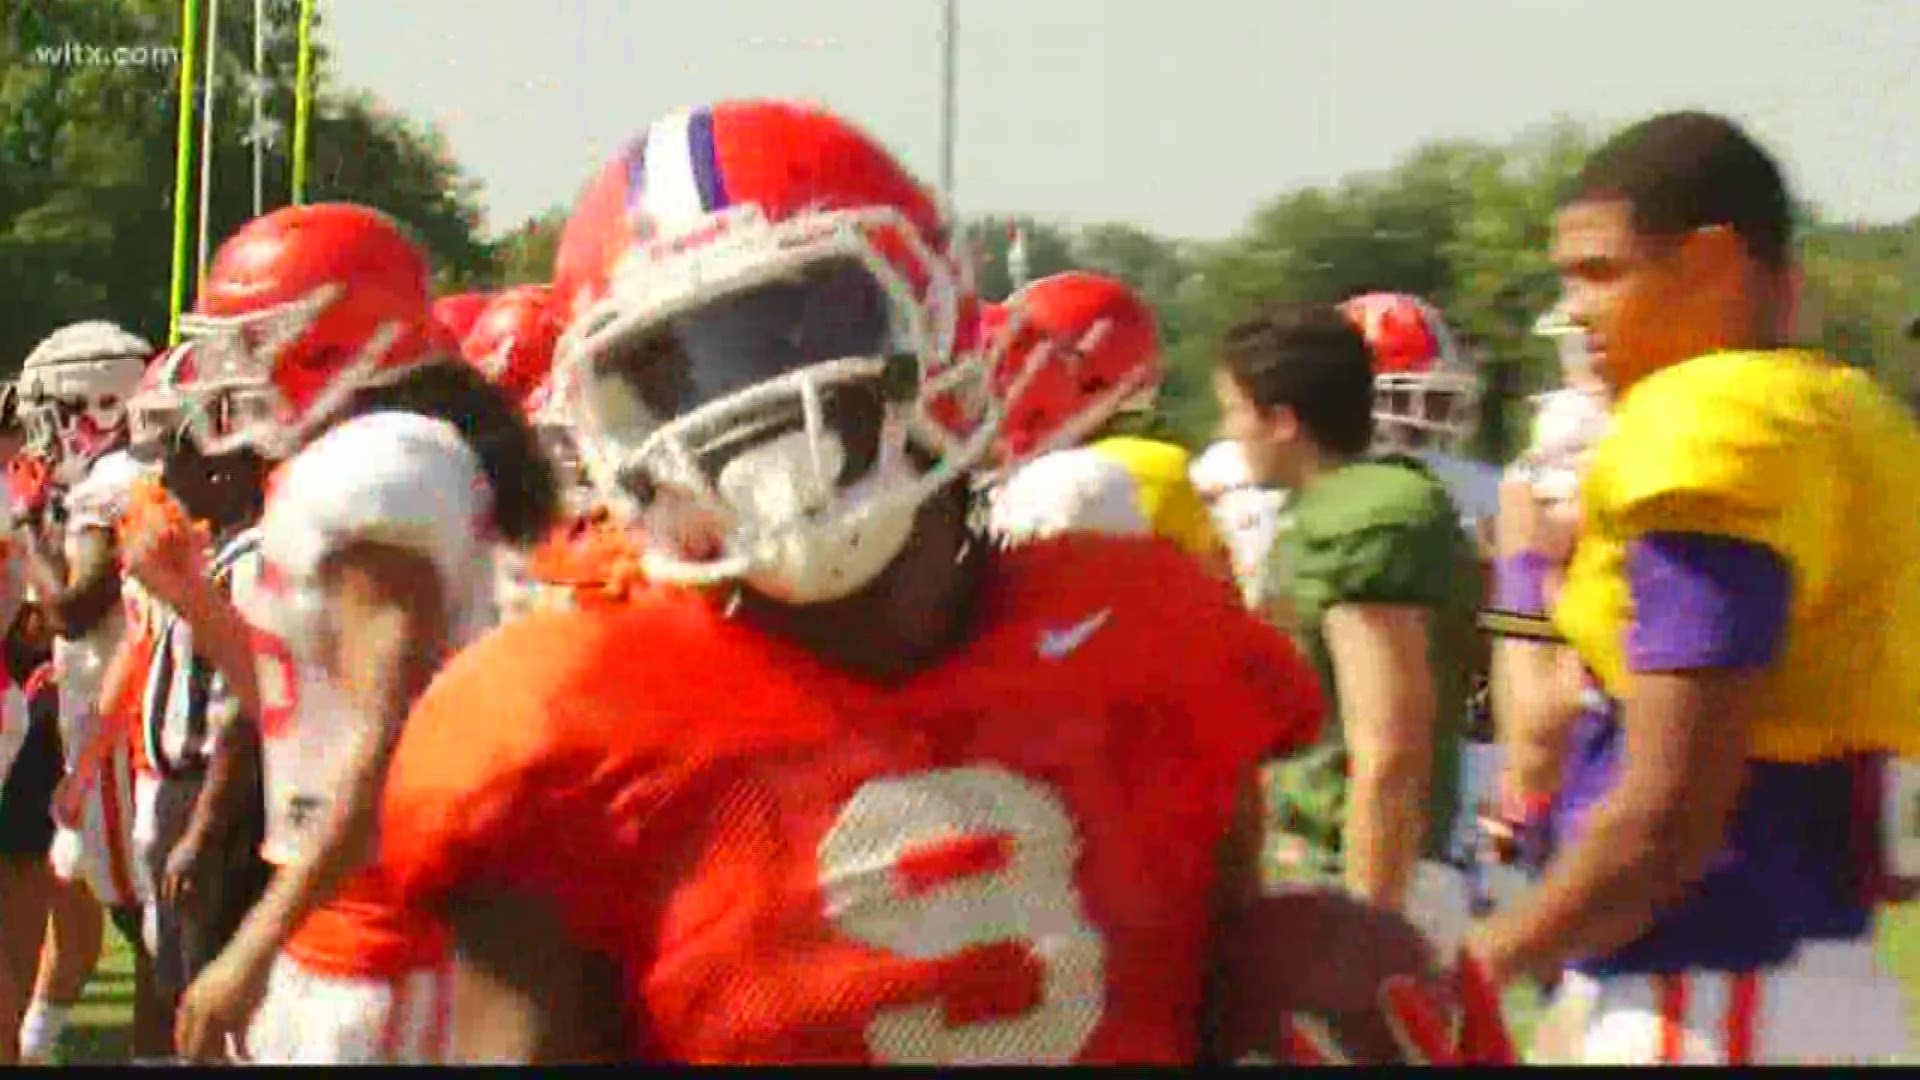 Clemson strapped on full pads and held an intense Thursday morning workout that was kicked off by the "Win Drill".